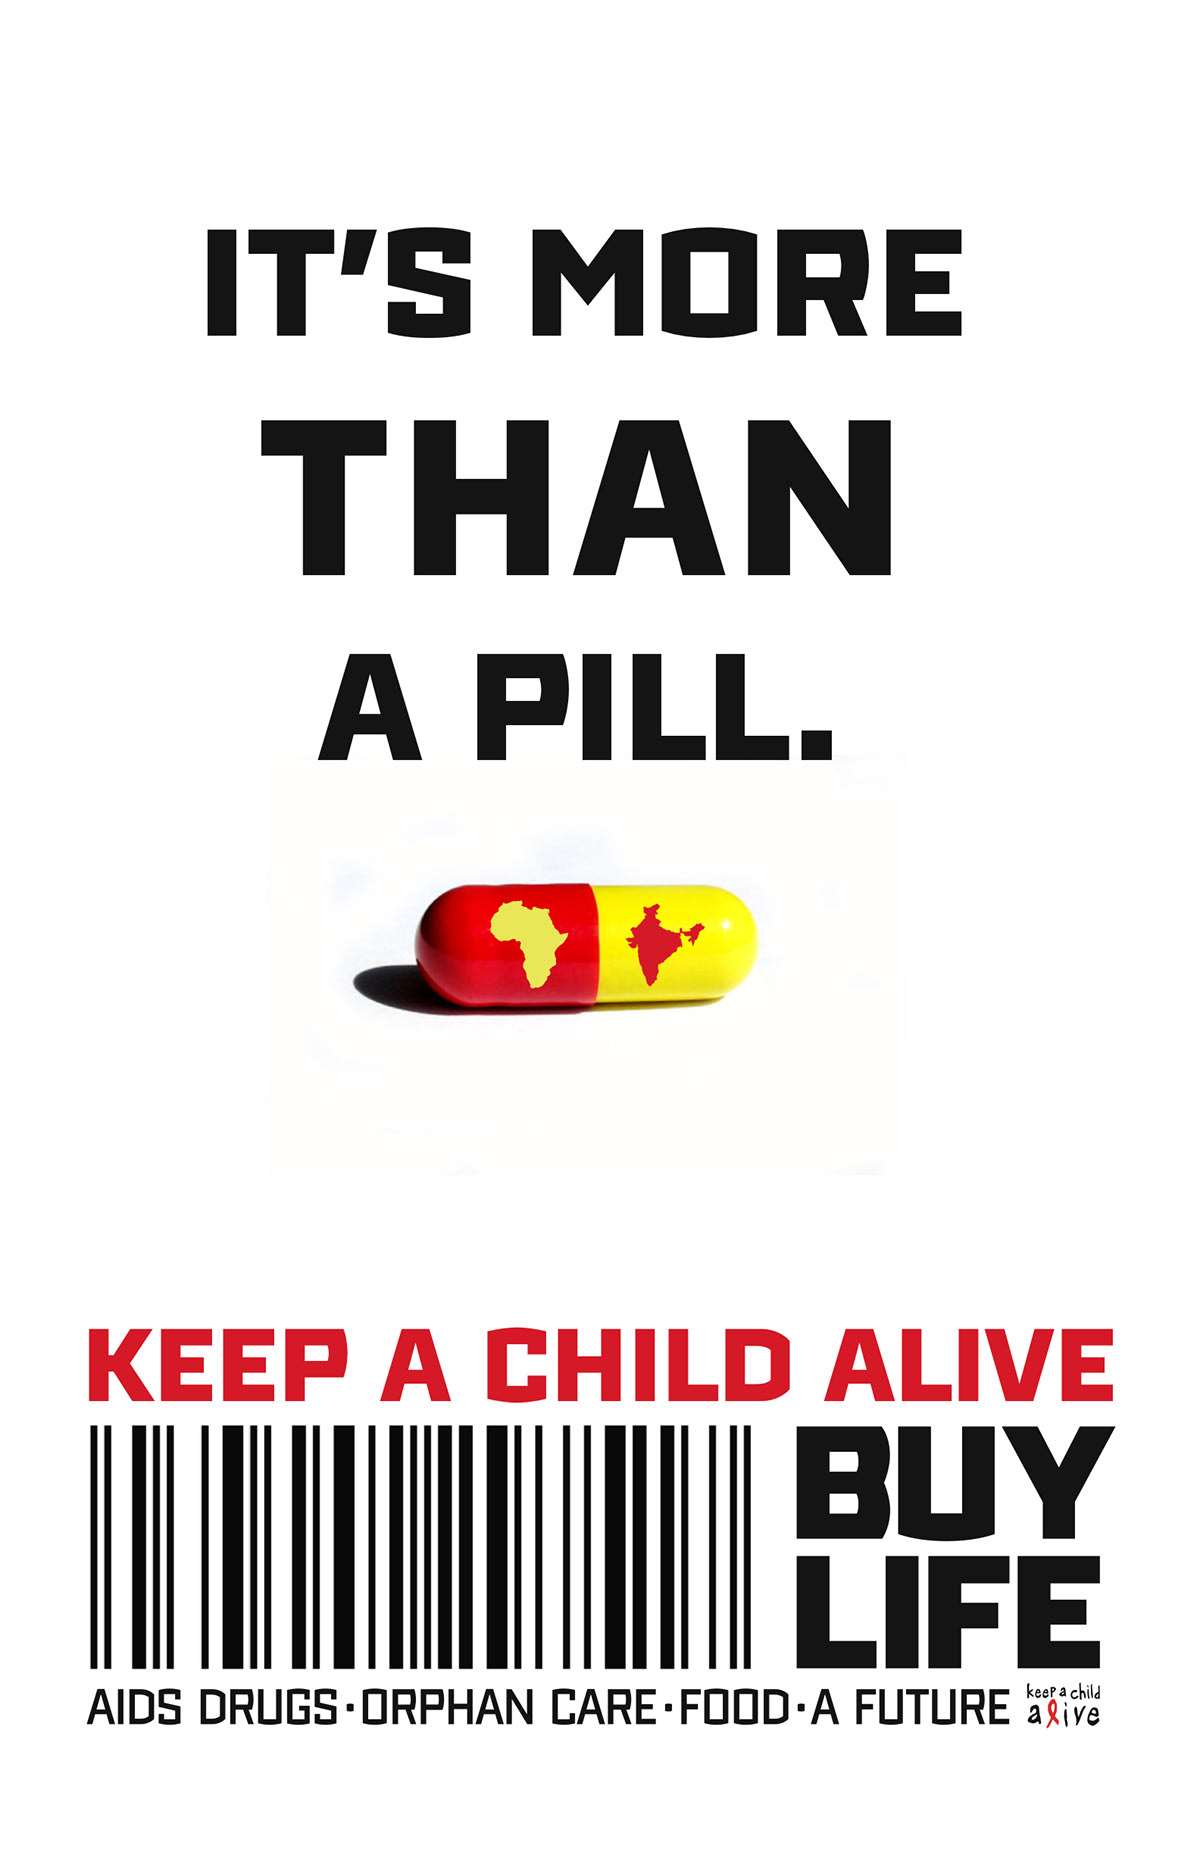 pill buy life keep a child alive nyc aids walk 2011